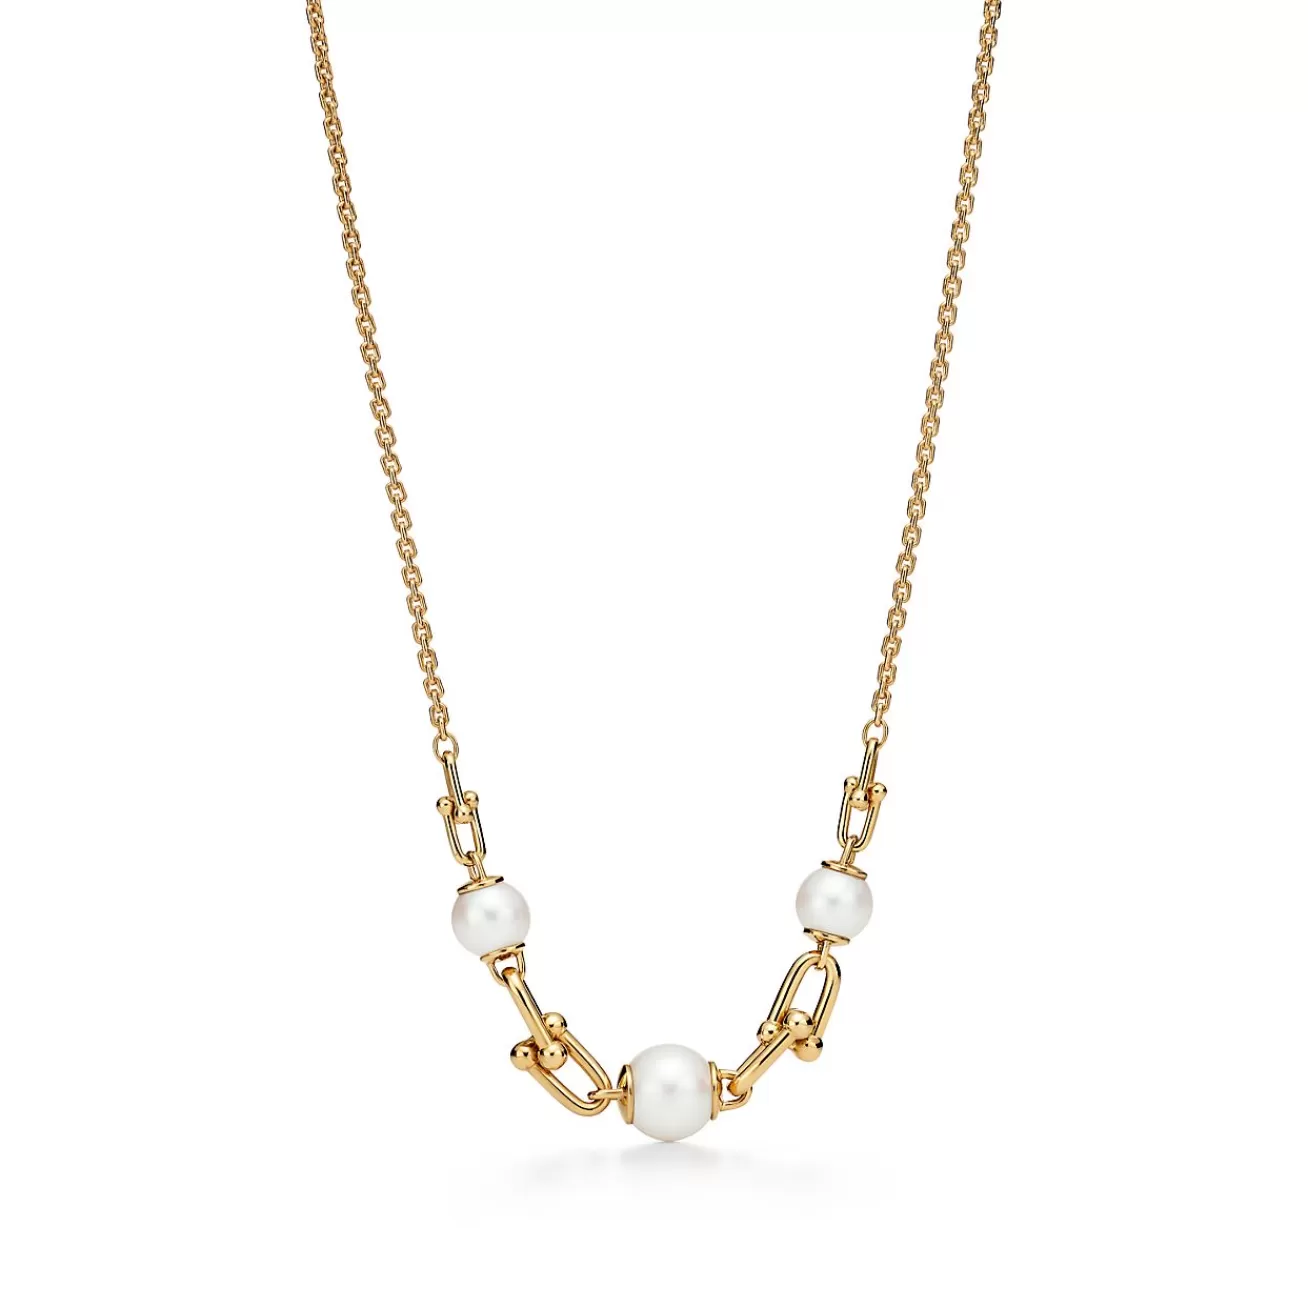 Tiffany & Co. Tiffany HardWear Link Necklace in Yellow Gold with Freshwater Pearls | ^ Necklaces & Pendants | Gold Jewelry